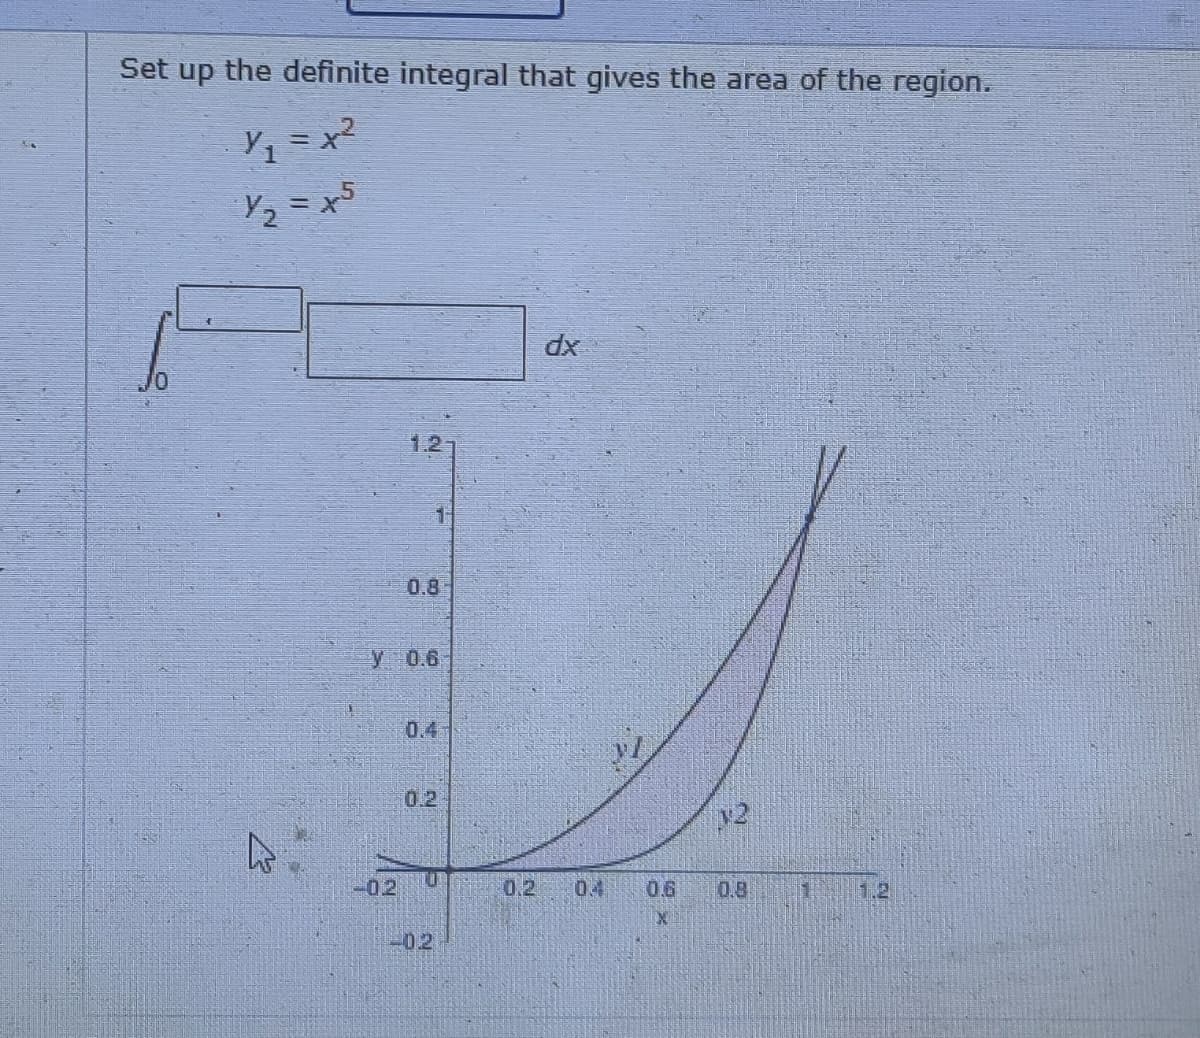 Set up the definite integral that gives the area of the region.
dx
1.2
0.8
y 0.6
0.4
0.2
v2
02
0.2
04
0.6
0.8
1
1.2
-02
